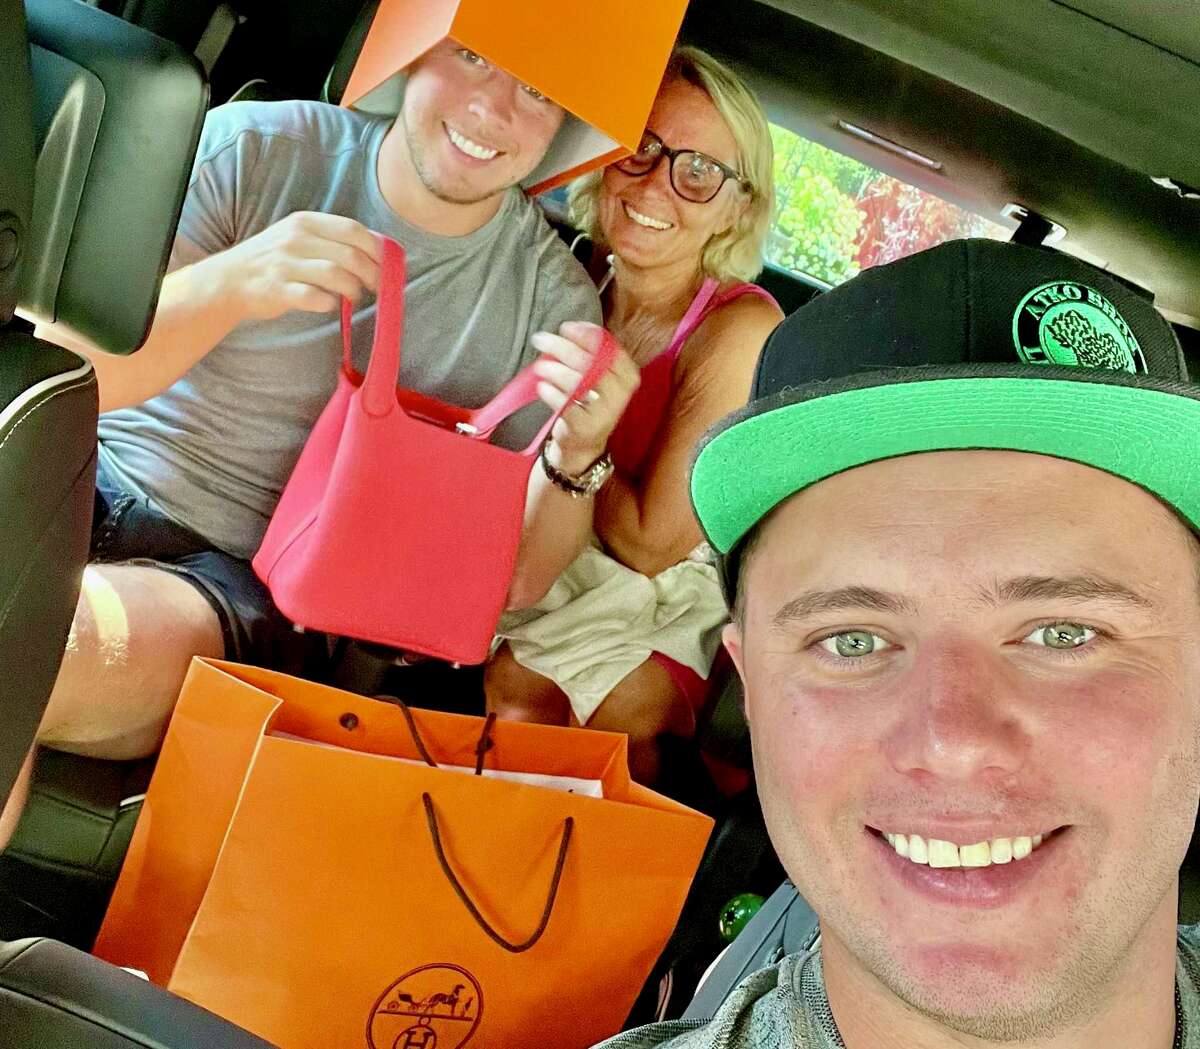 NFL Philadelphia Flyer Cam Atkinson, a Greenwich native, with his mom, Ellen Atkinson, and brother, Brett Atkinson, after shopping at Hermès on Greenwich Avenue last week.